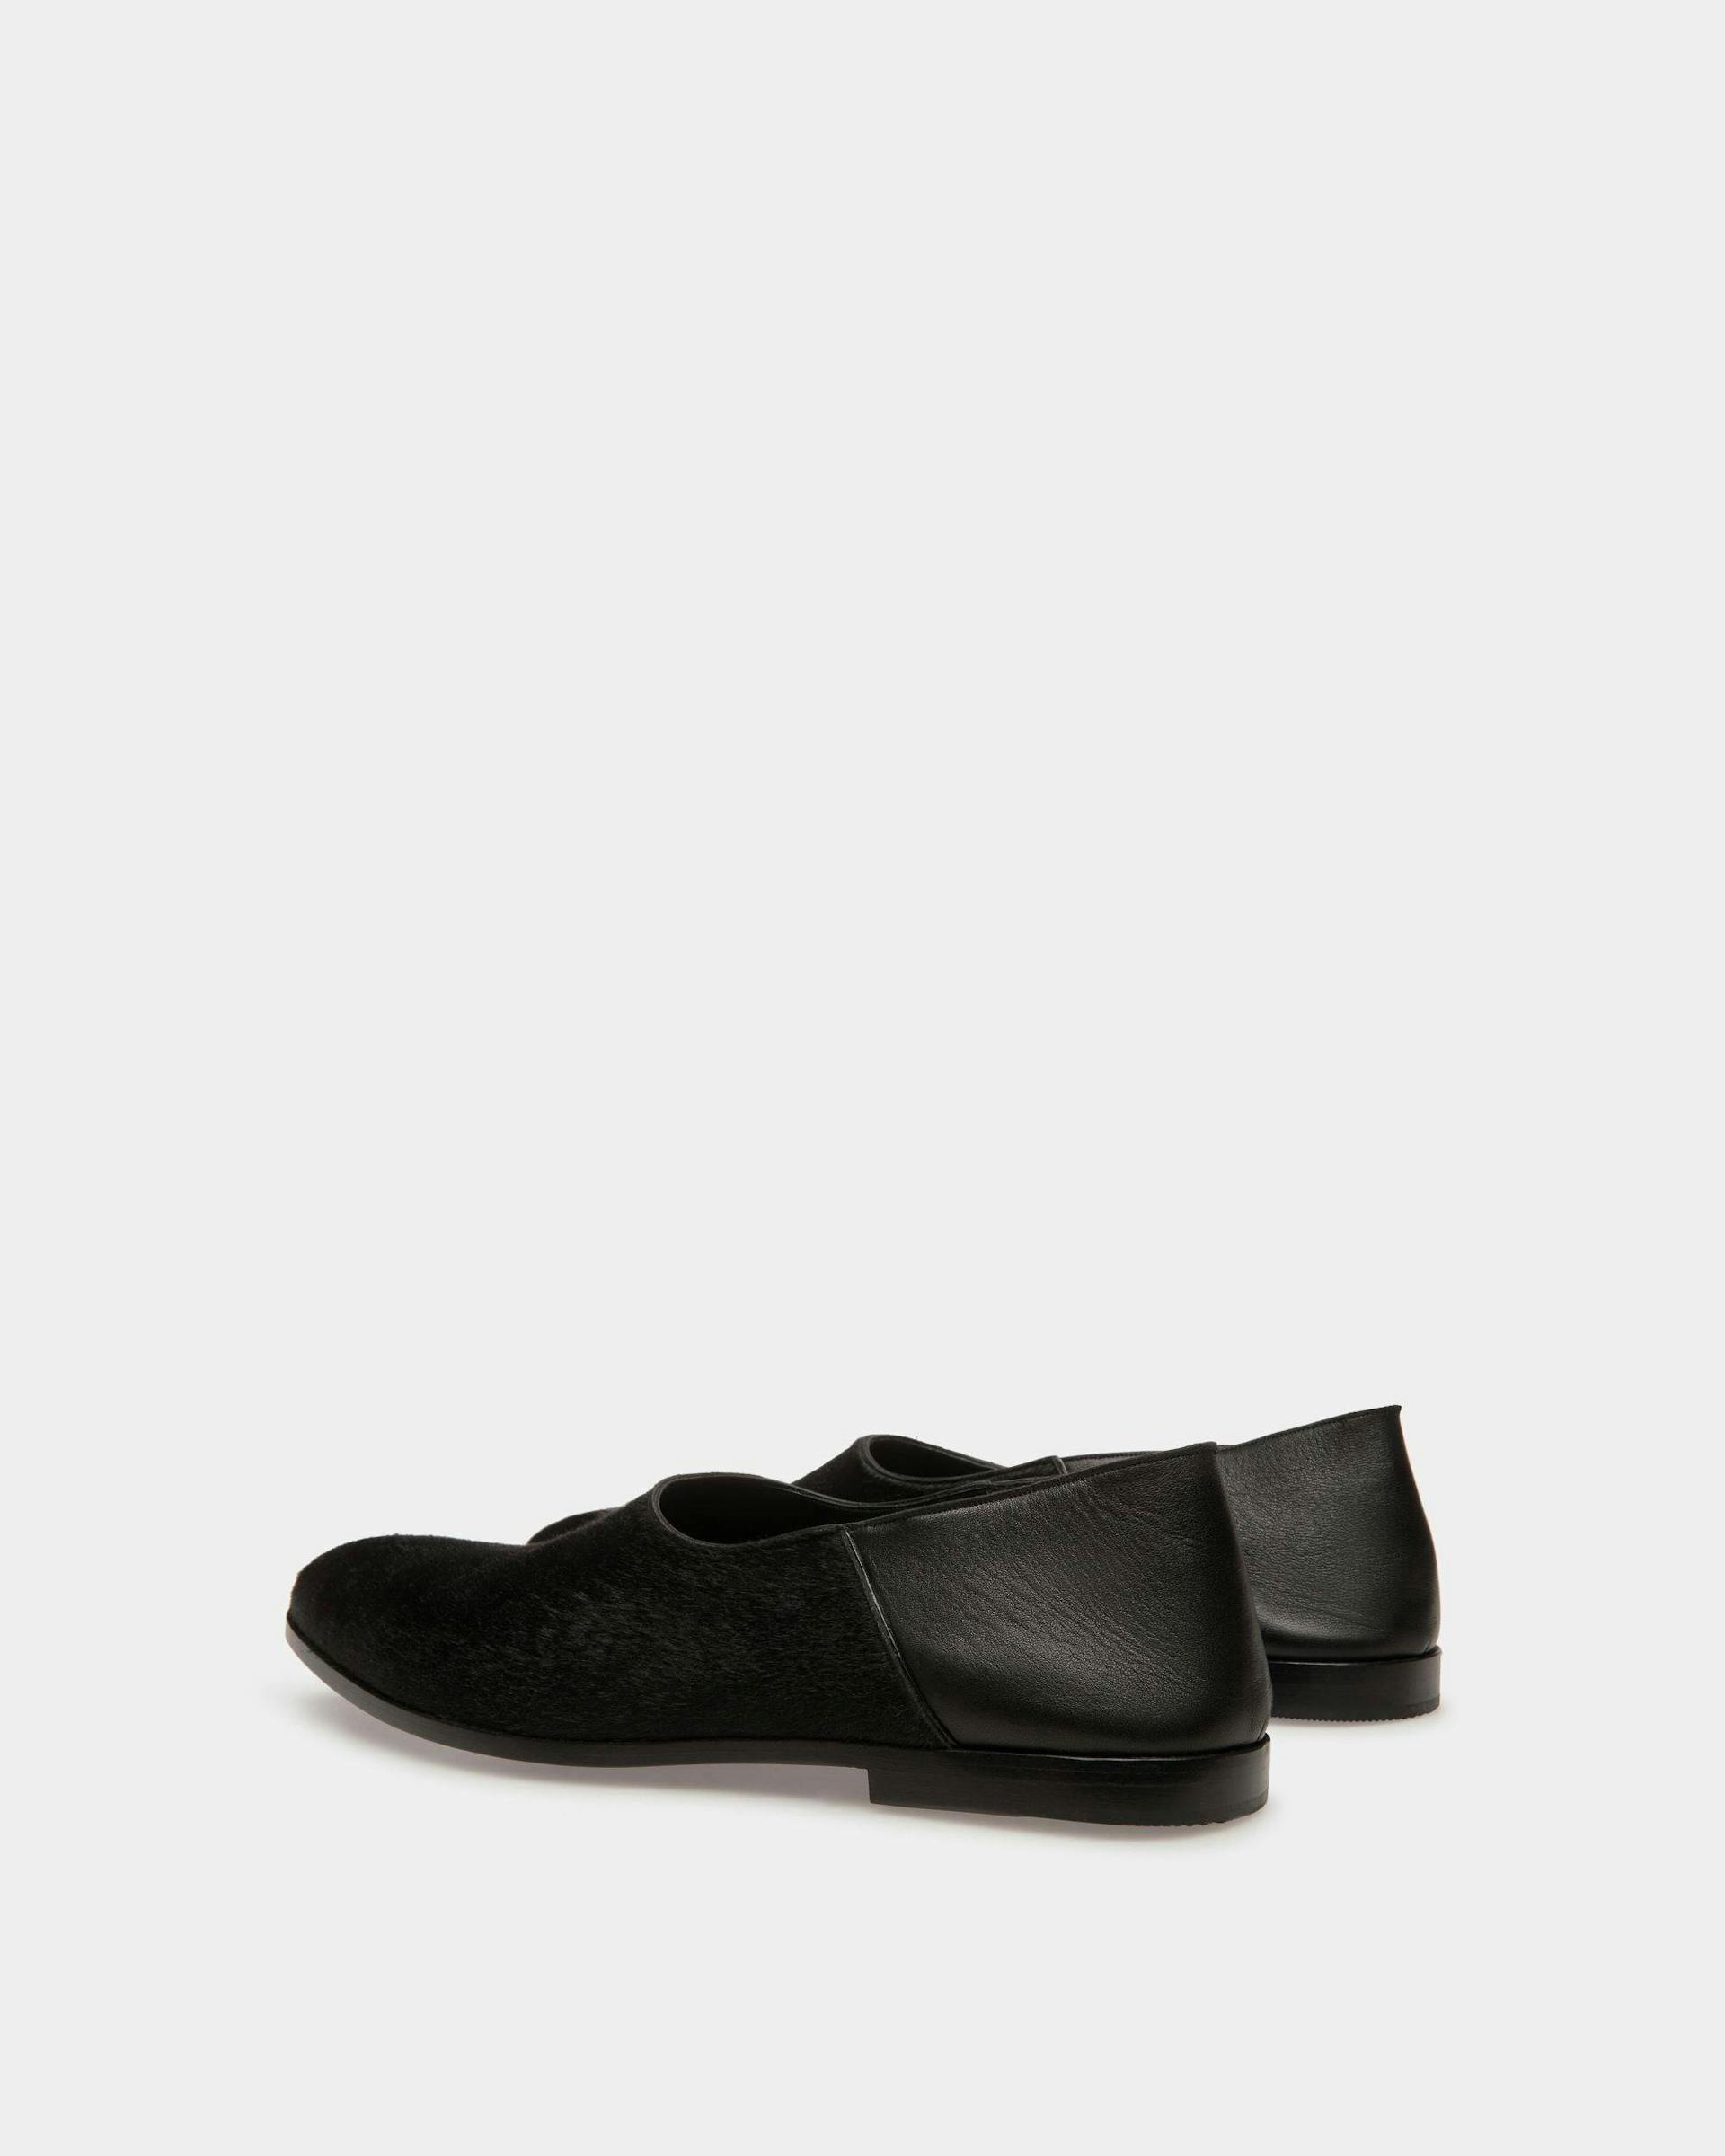 Men's Vegas Flat Loafers In Black Haircalf Leather | Bally | Still Life 3/4 Back